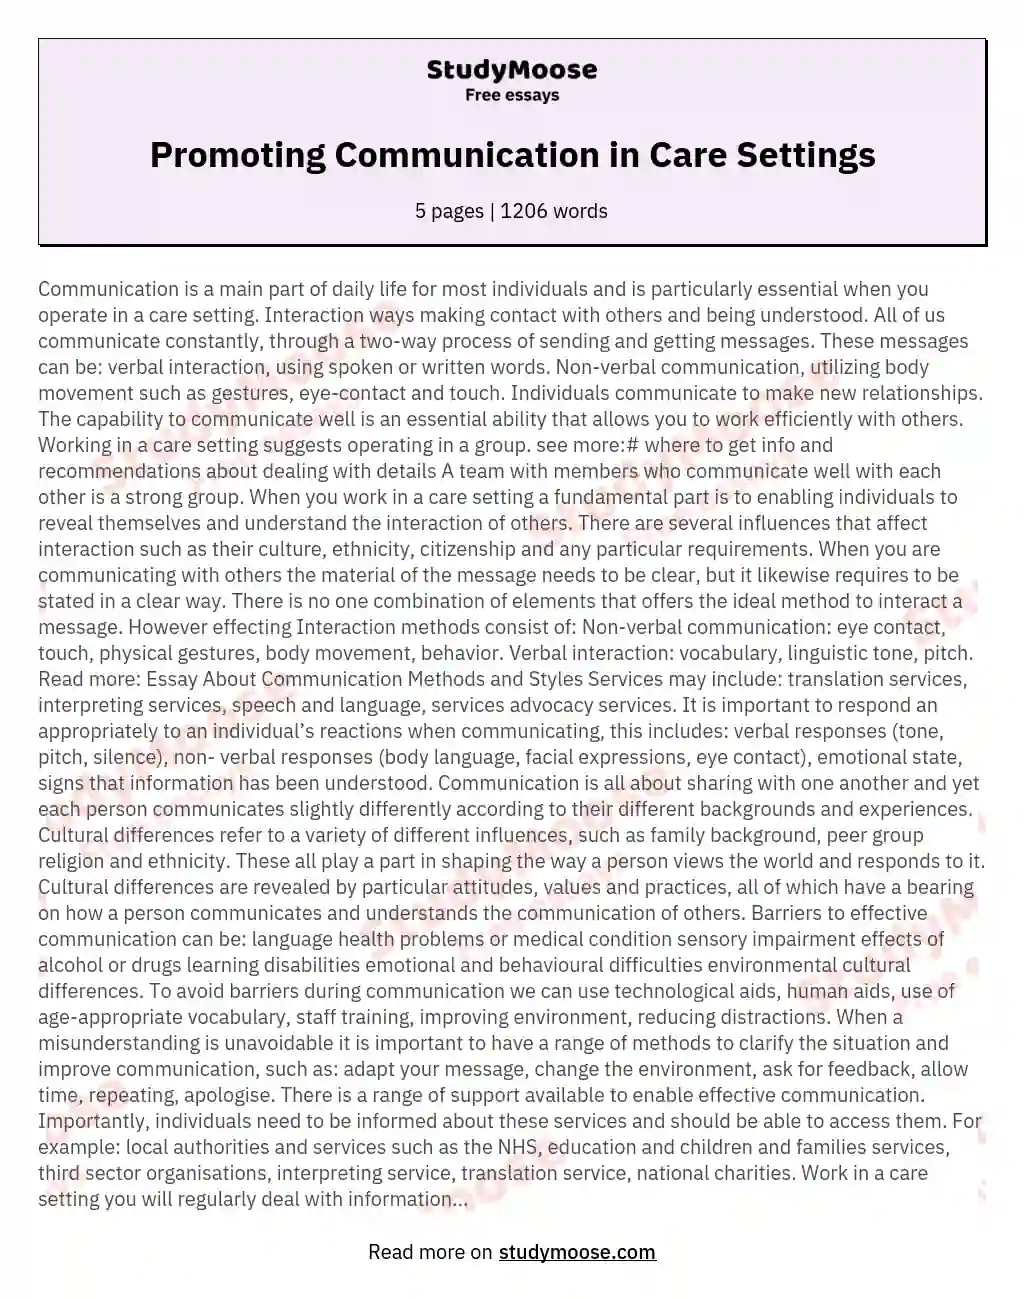 Promote Communication in Health, Social Care or Children’s and Young People’s Settings